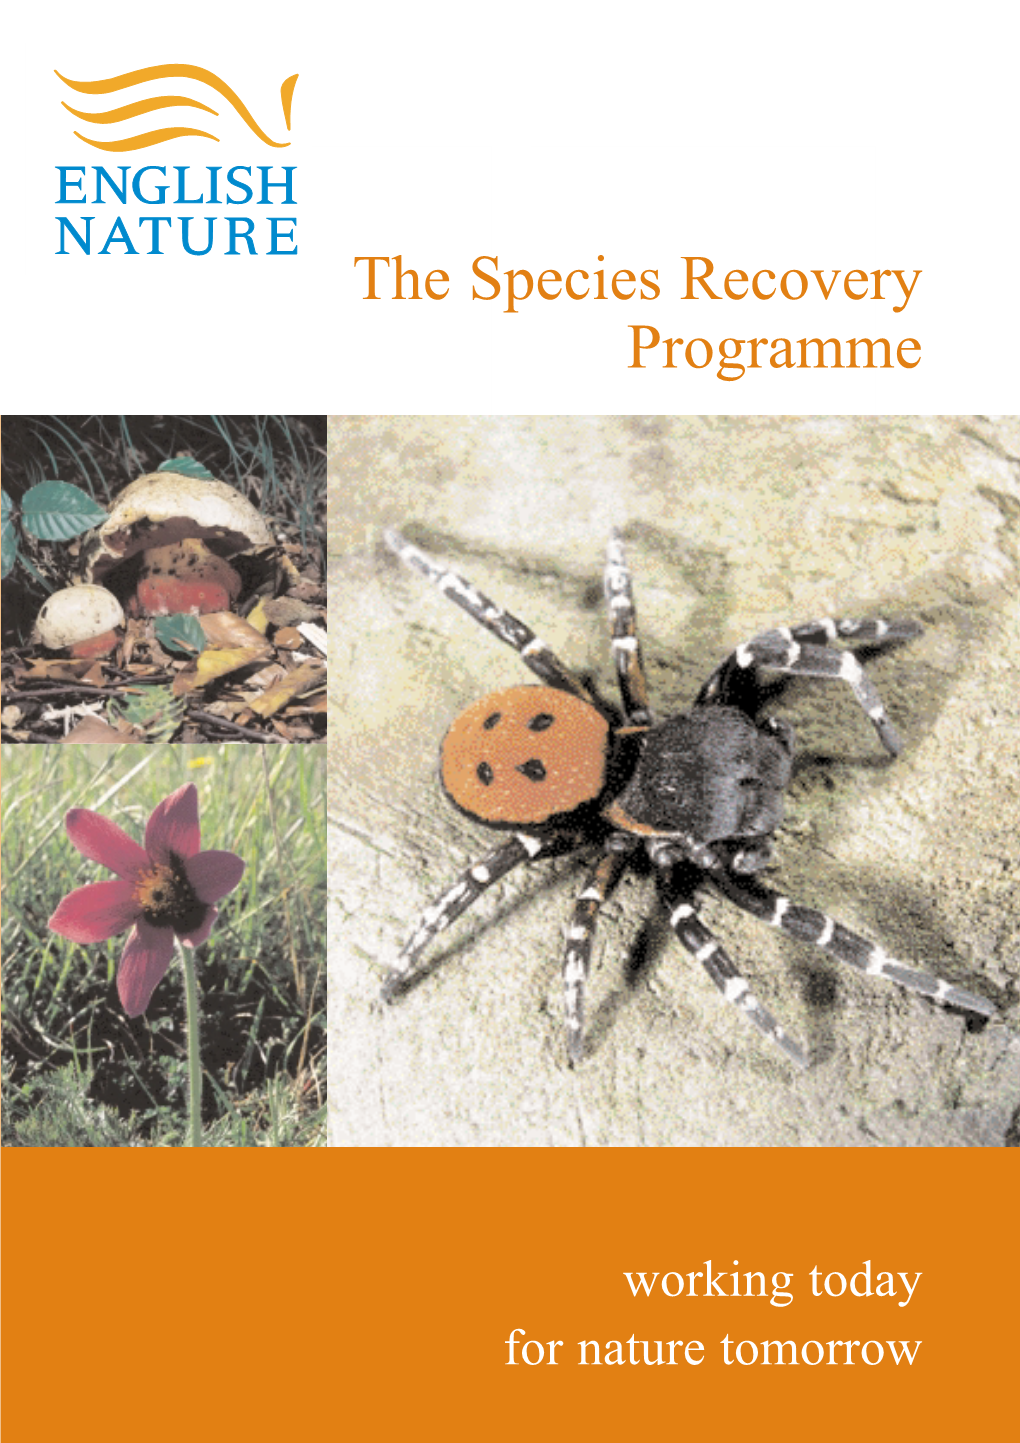 The Species Recovery Programme